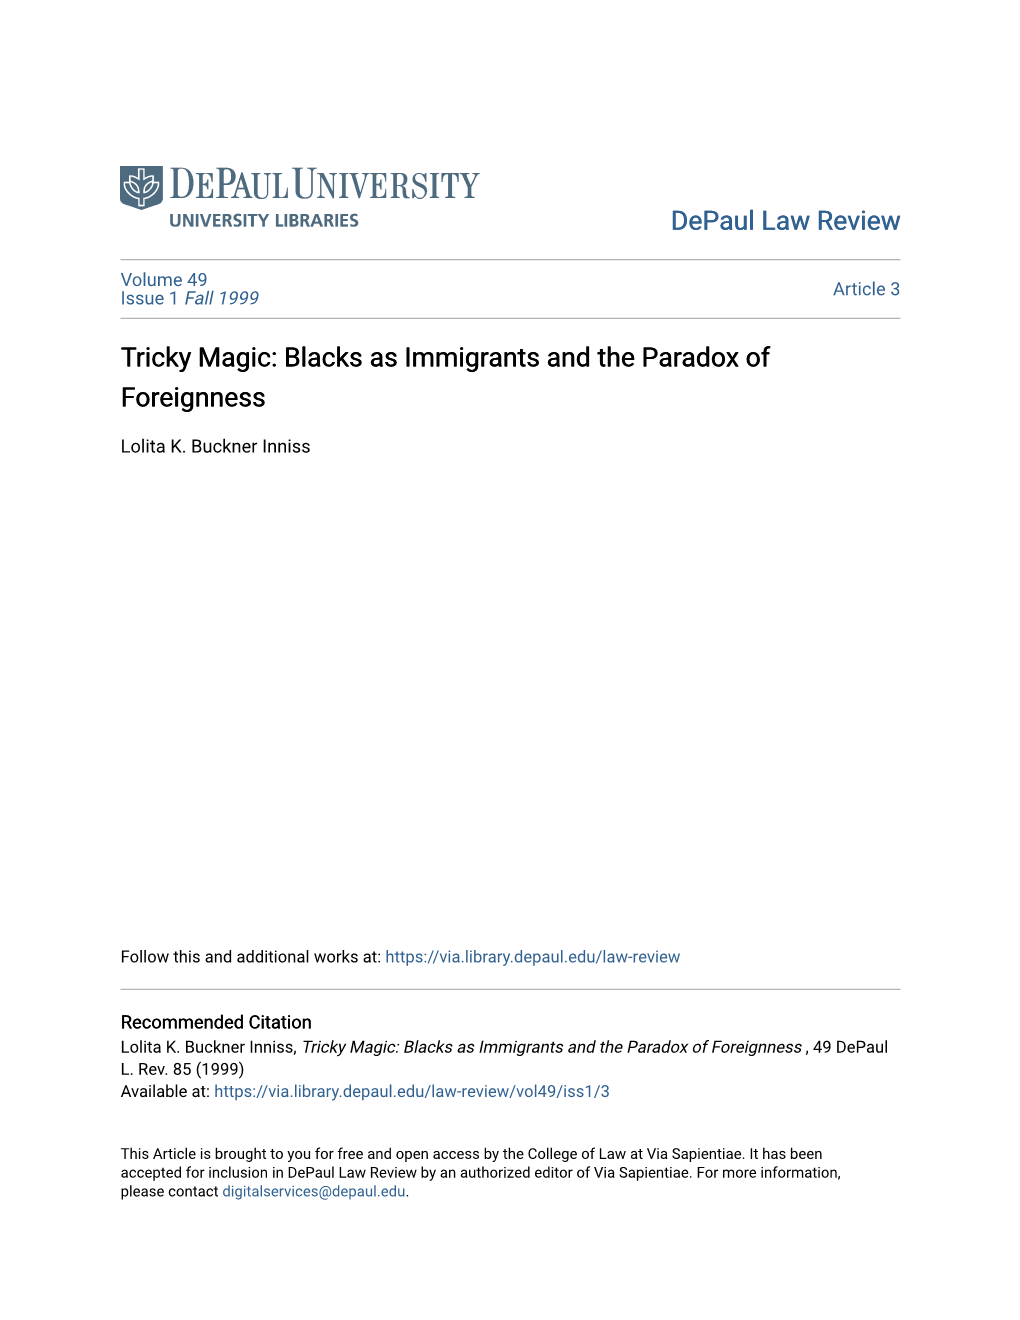 Blacks As Immigrants and the Paradox of Foreignness